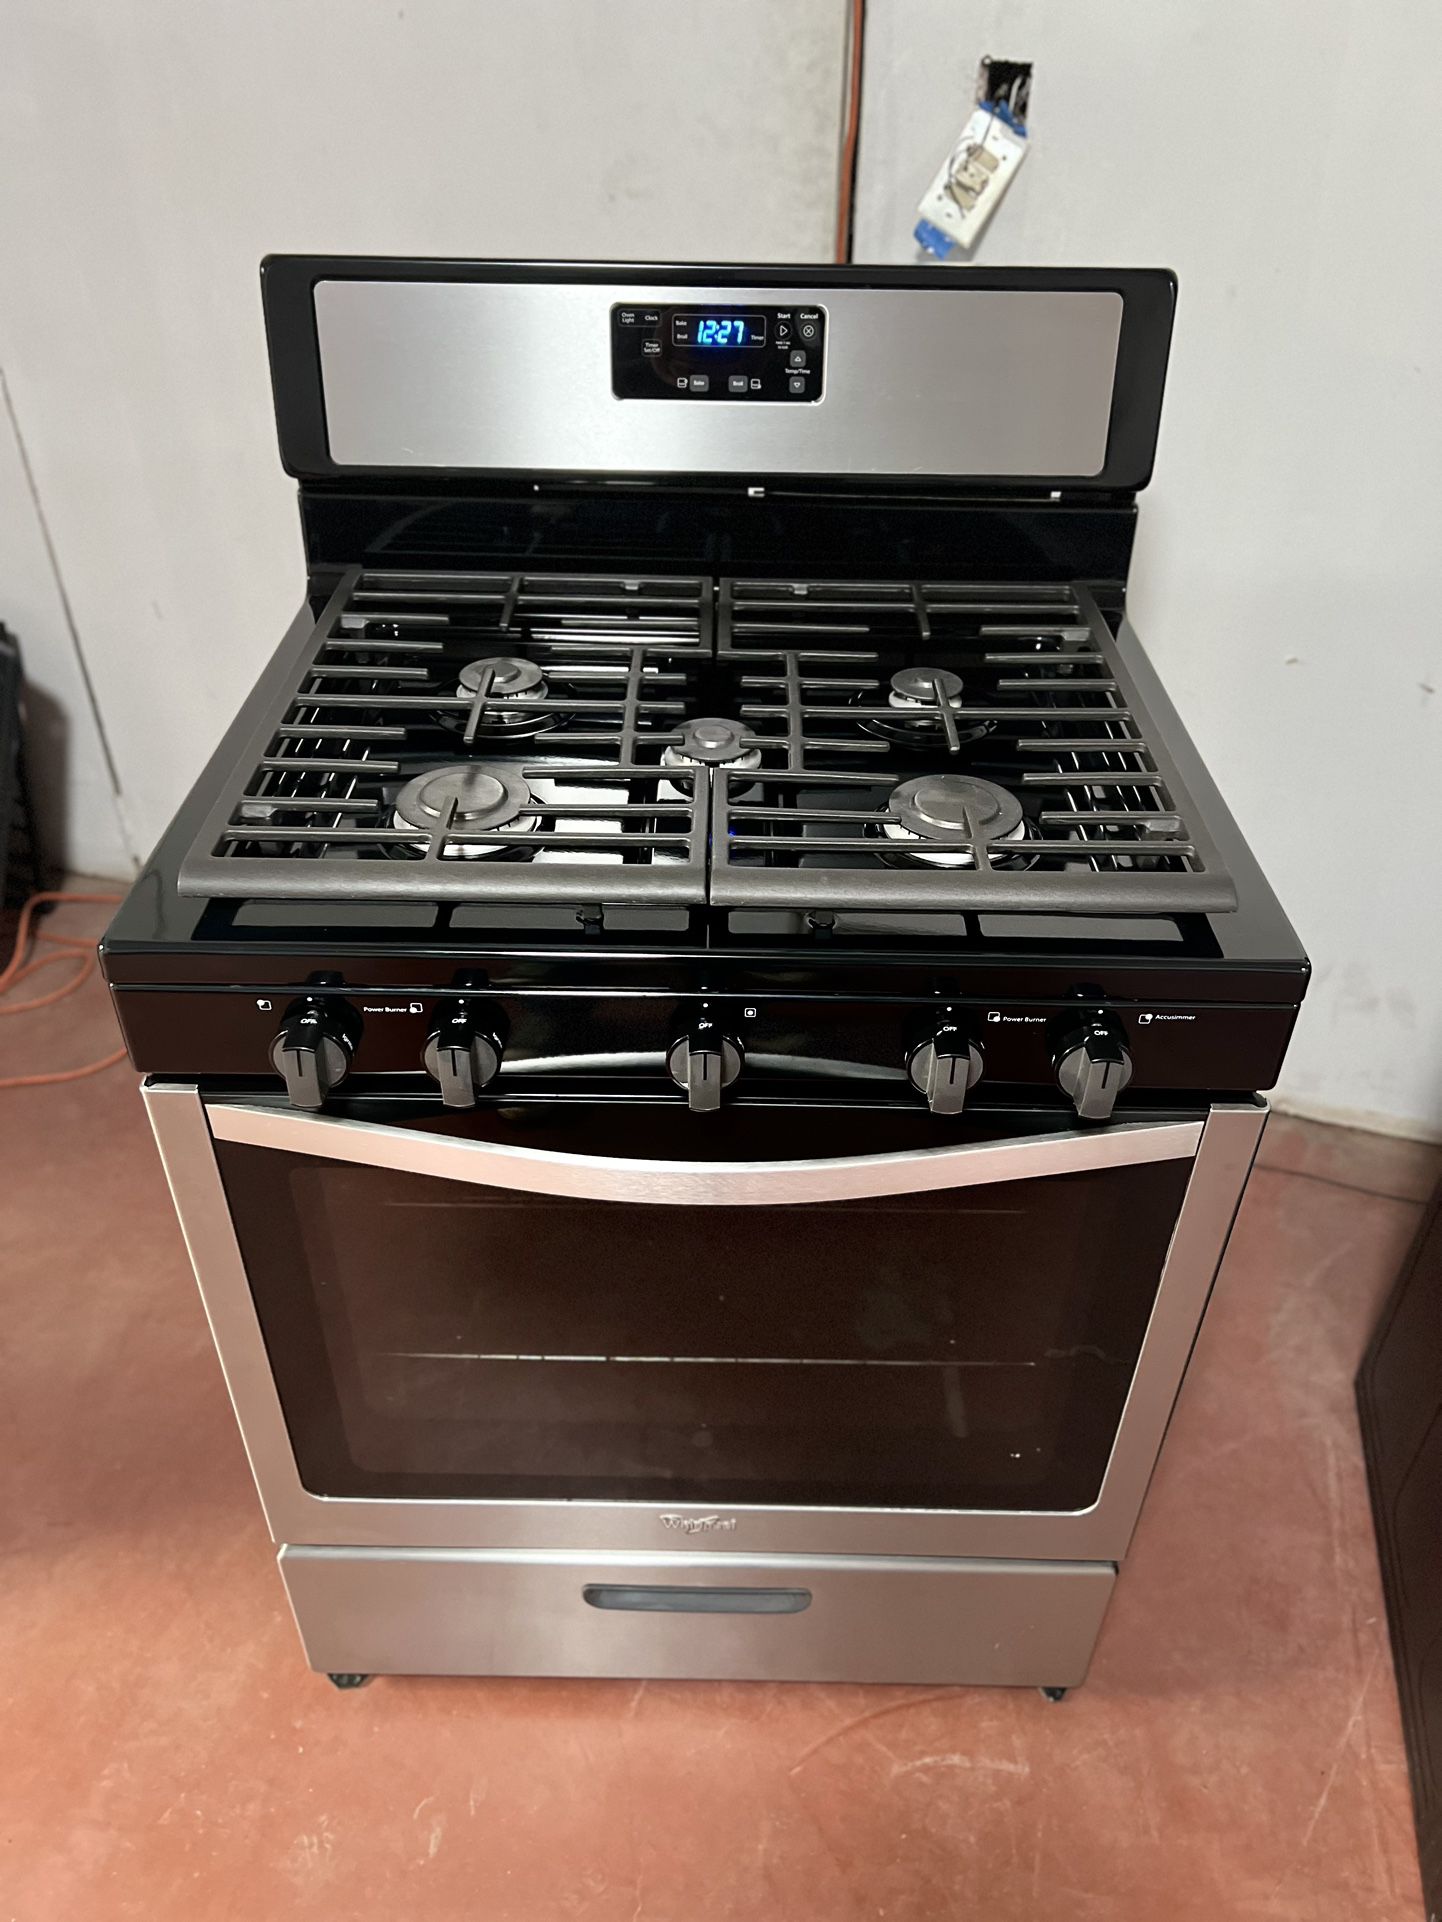 whirlpool gas stove 5 burners in perfect condition working at 💯 delivered to your home and installed with a 3 month warranty